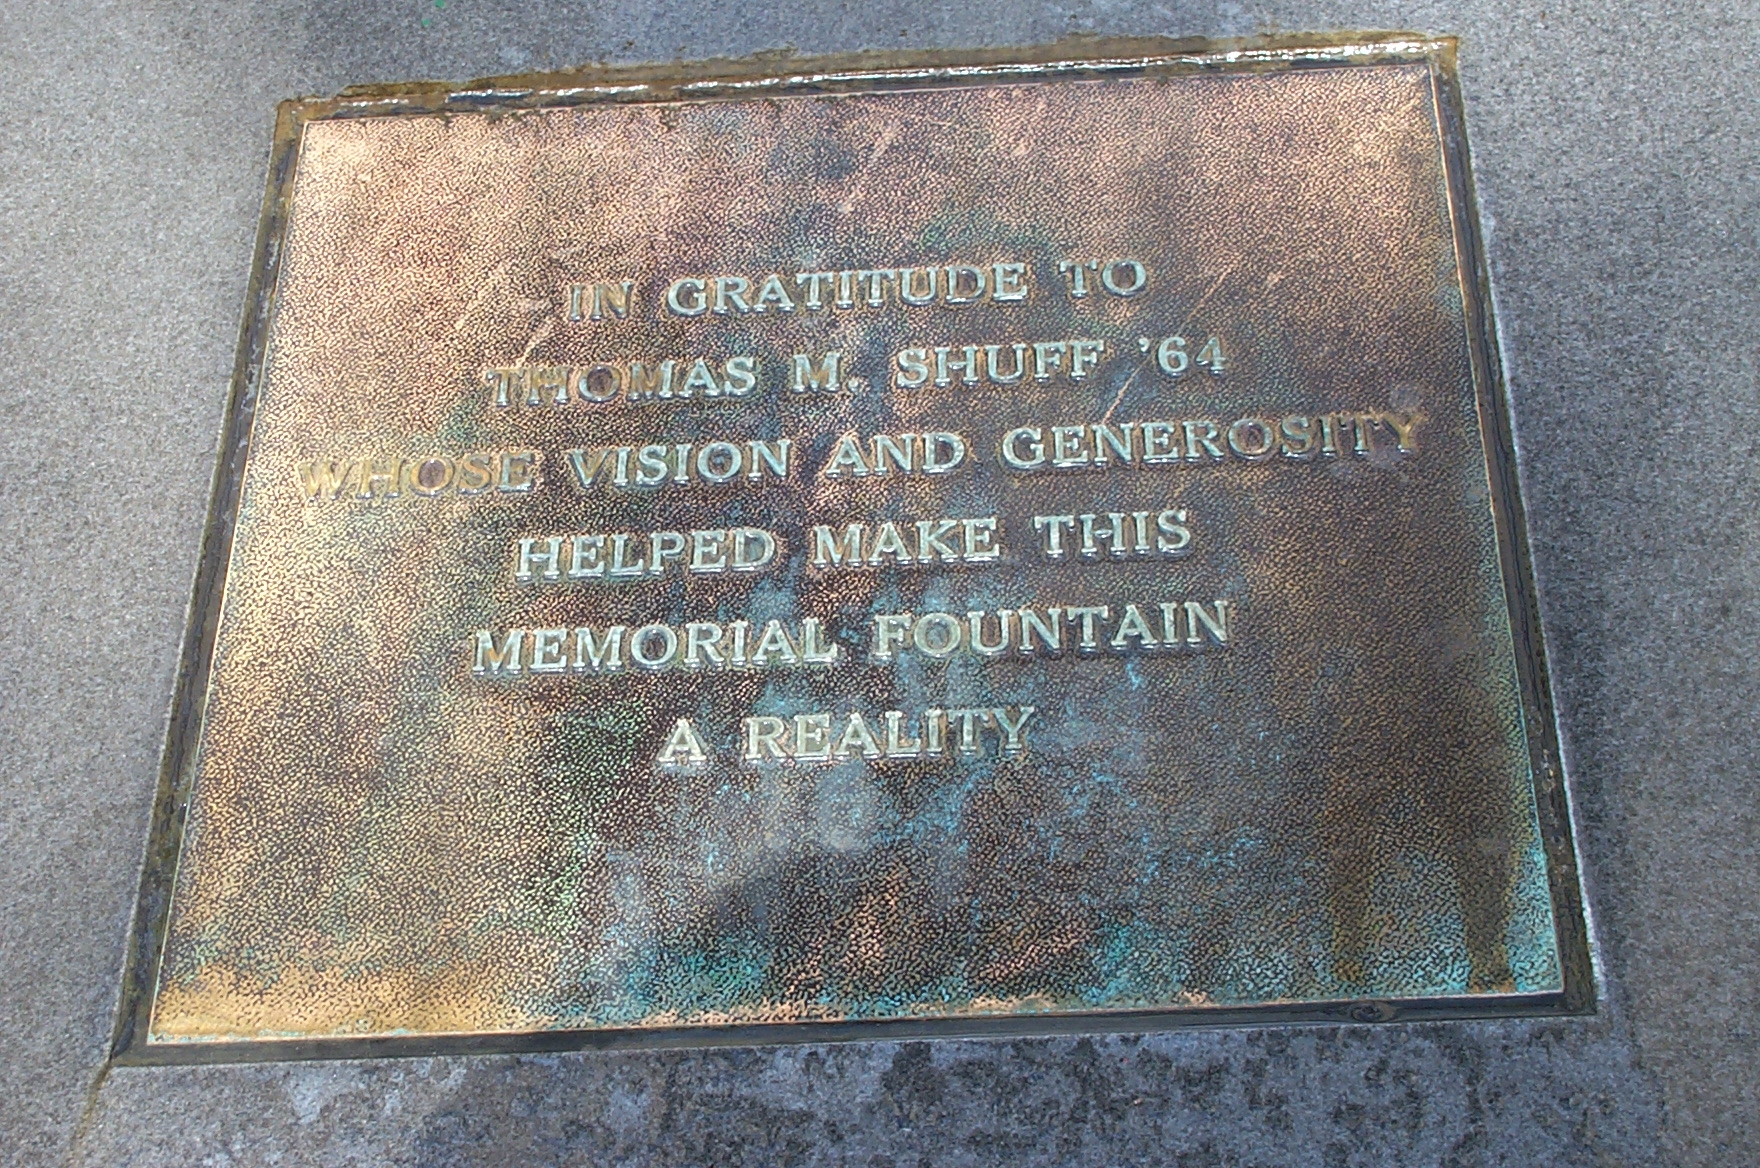 Marker on the ledge of the south side